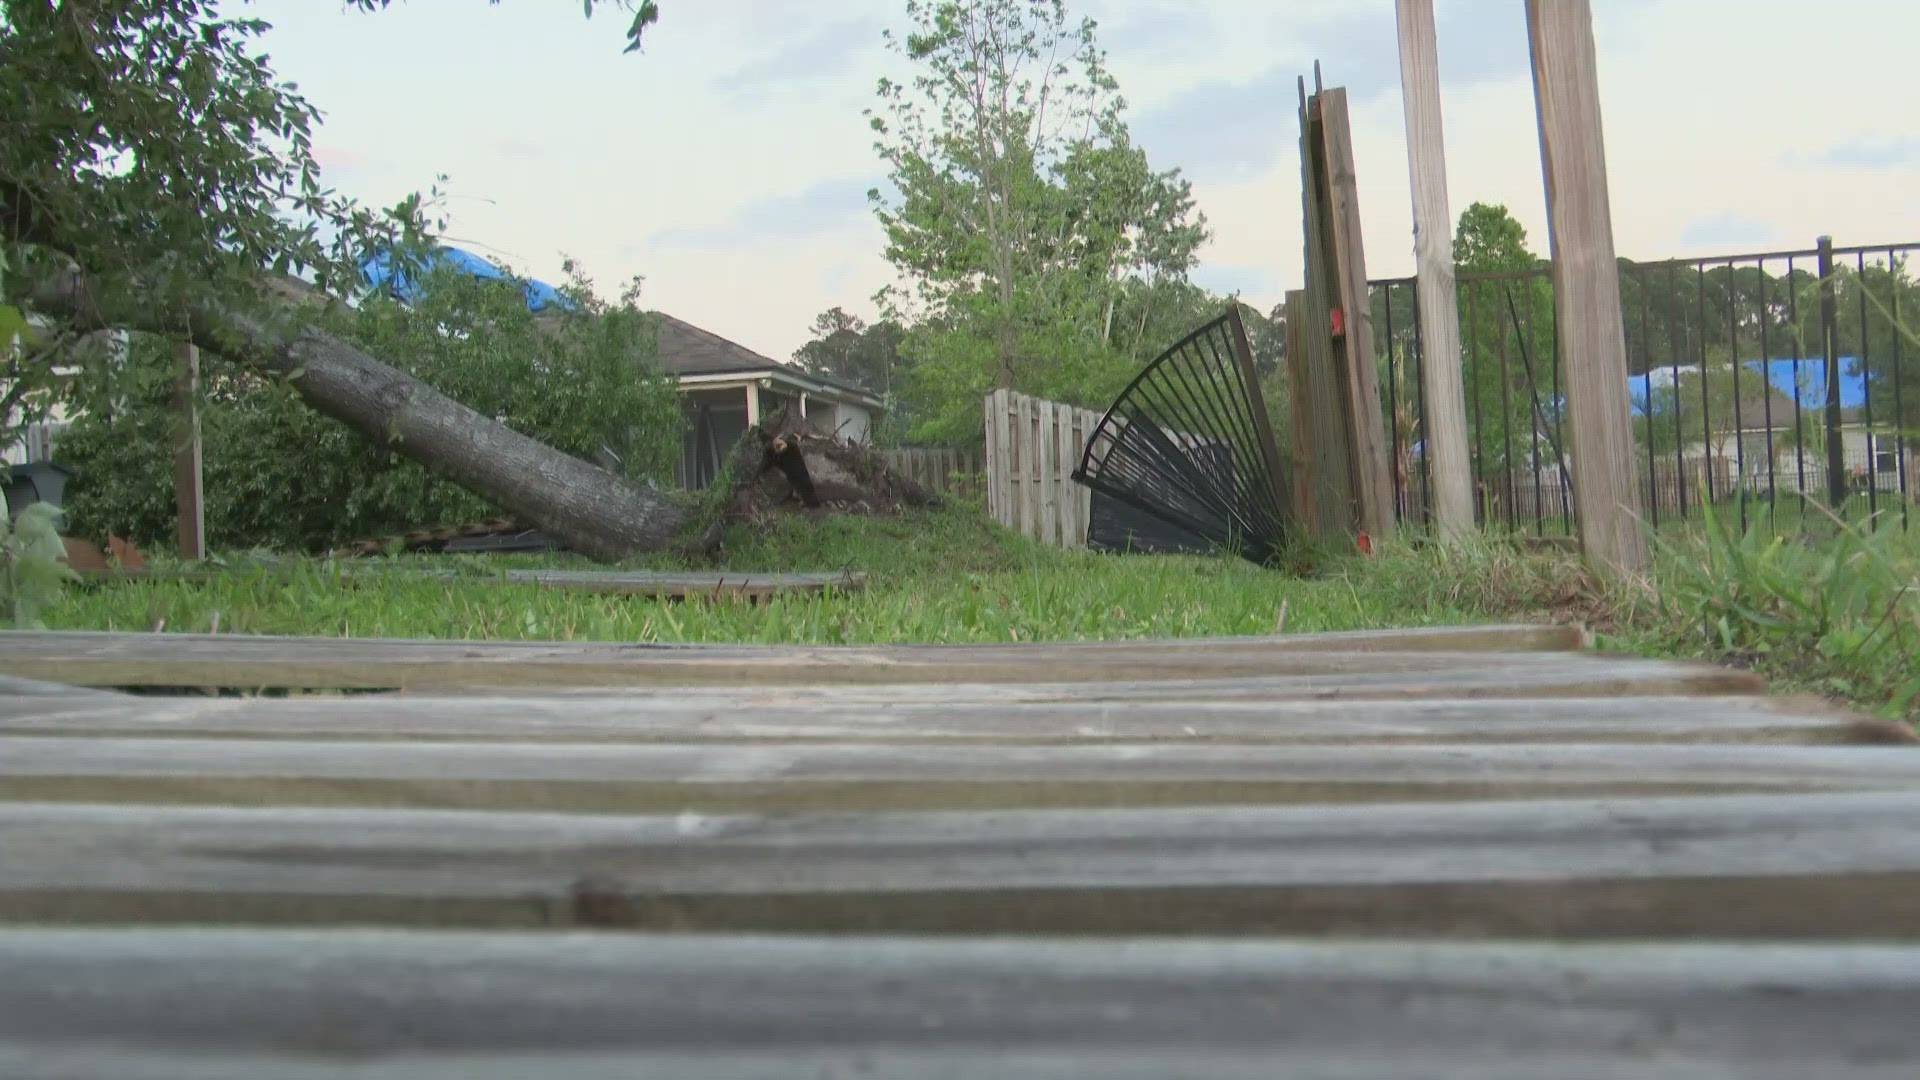 Tree and roof damage is now plaguing residents in the aftermath of Thusday's severe storms.